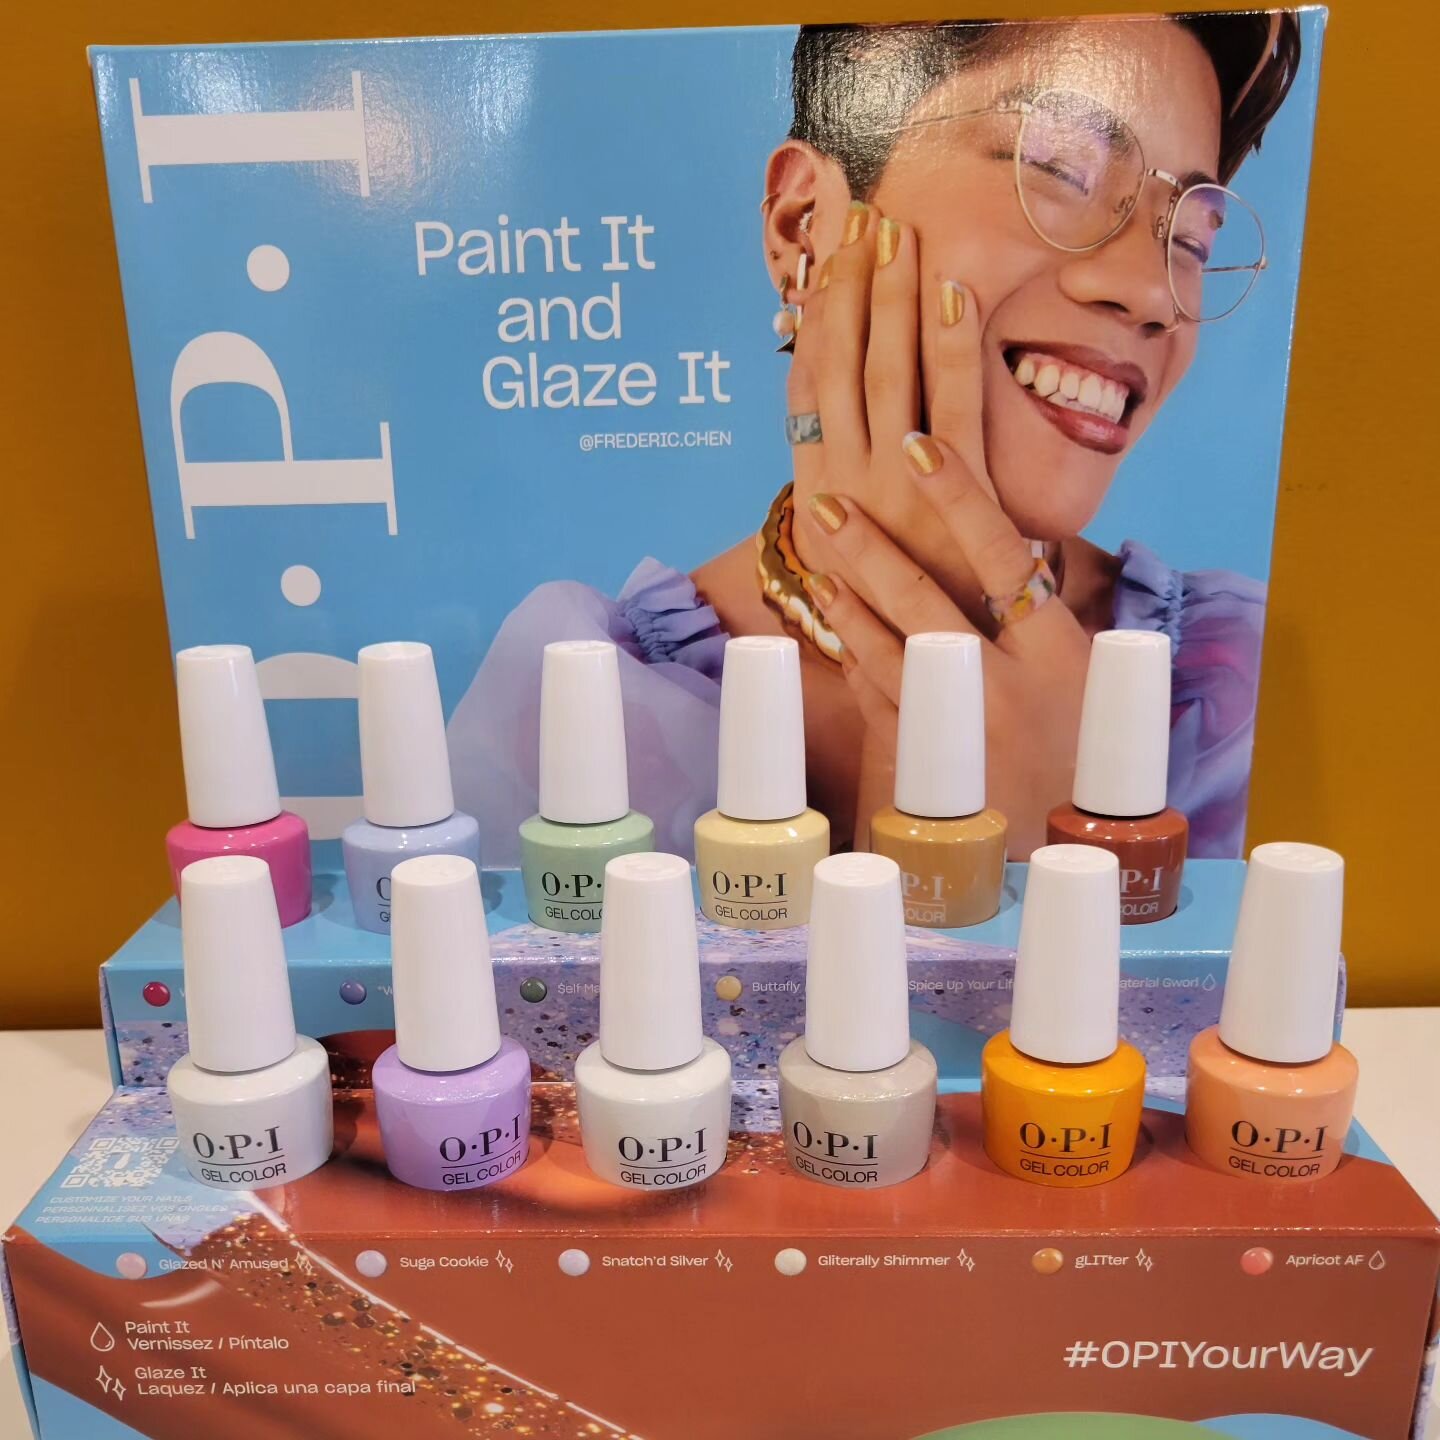 We have some new colors from @opi . Stop by the salon and try them out! Walk-in's available, book online or give us a call.
Studionailsbayview.com 
414-210-3242